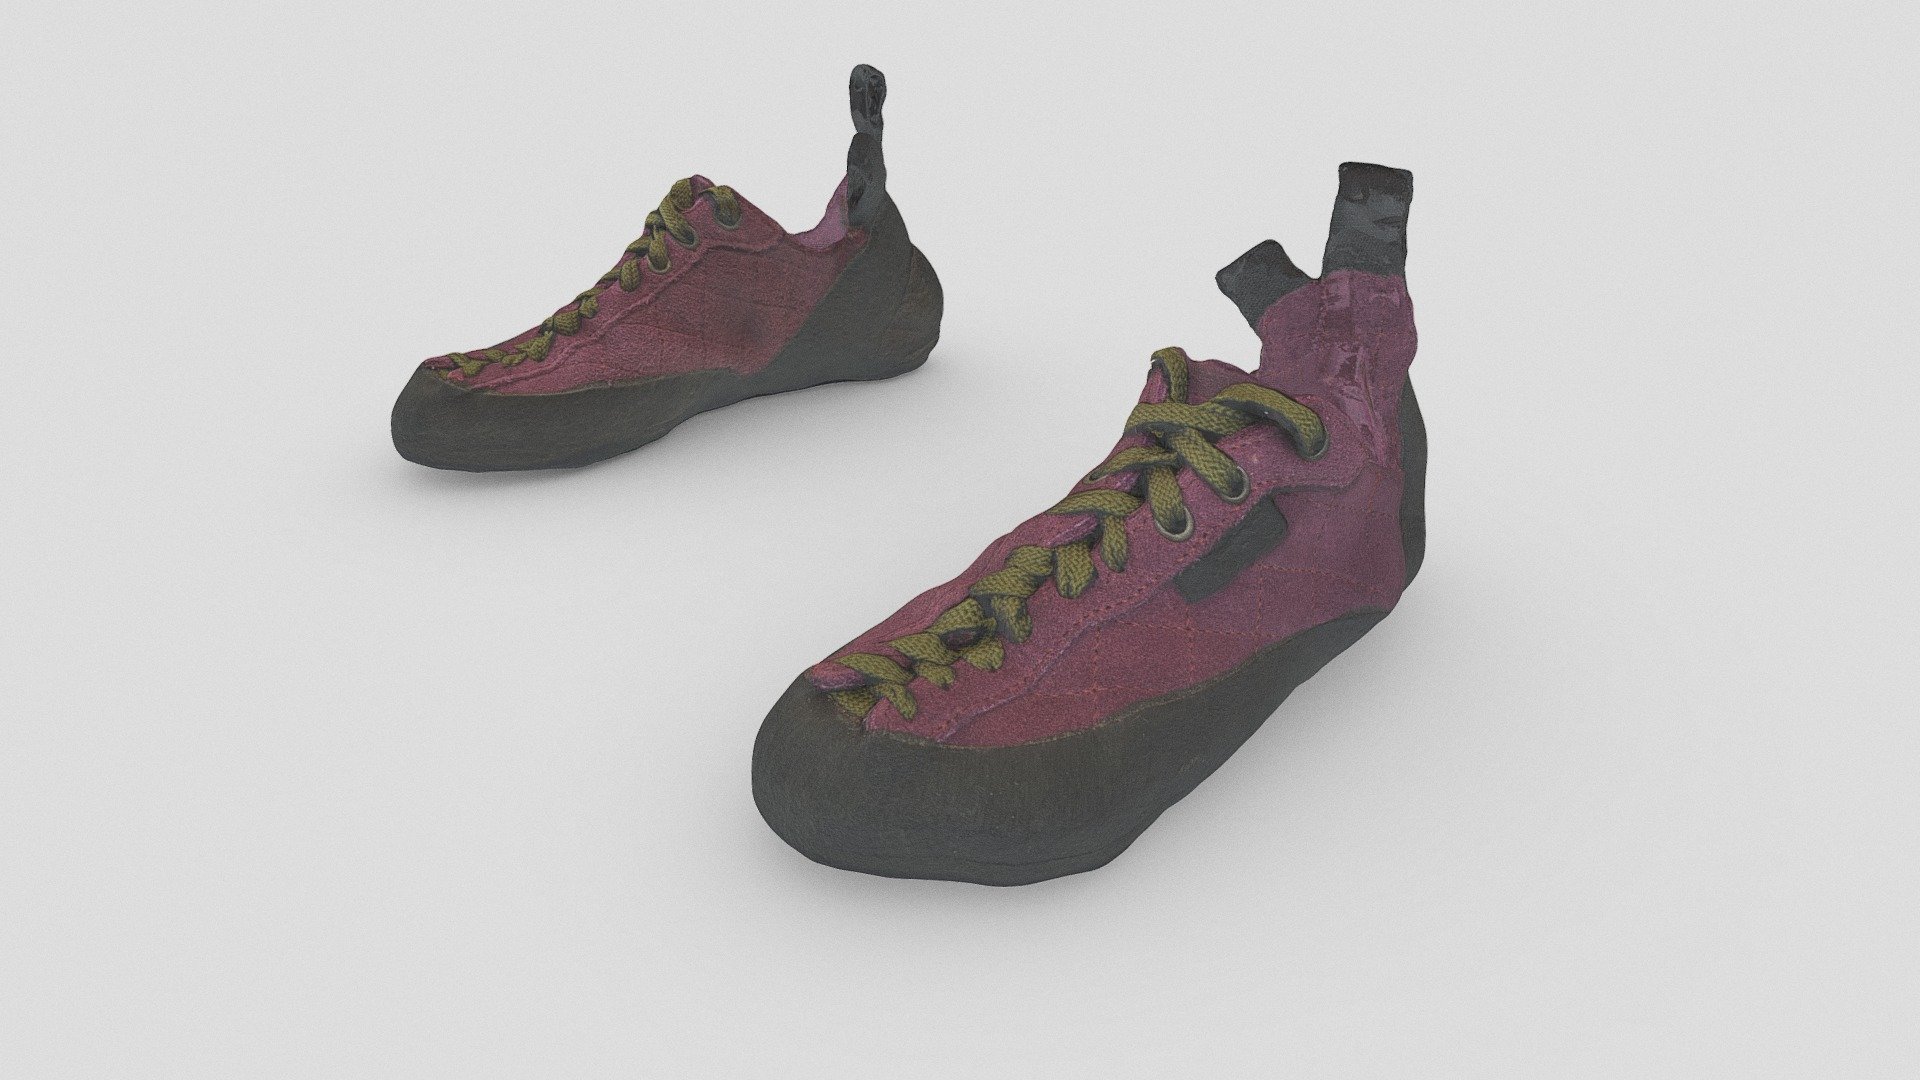 Climbing Shoes - Female Character